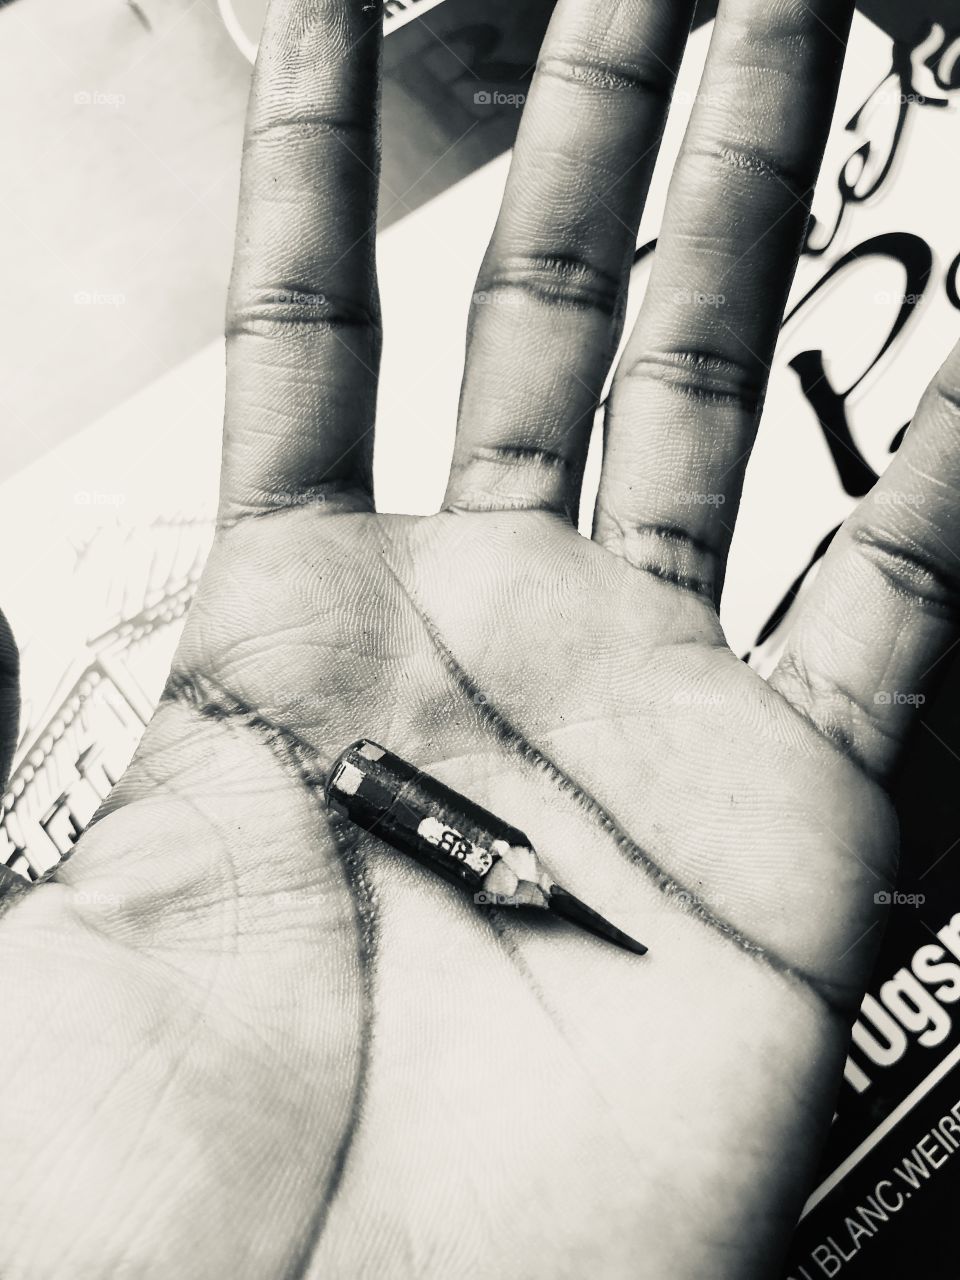 Holding a smaller used pencil in palm